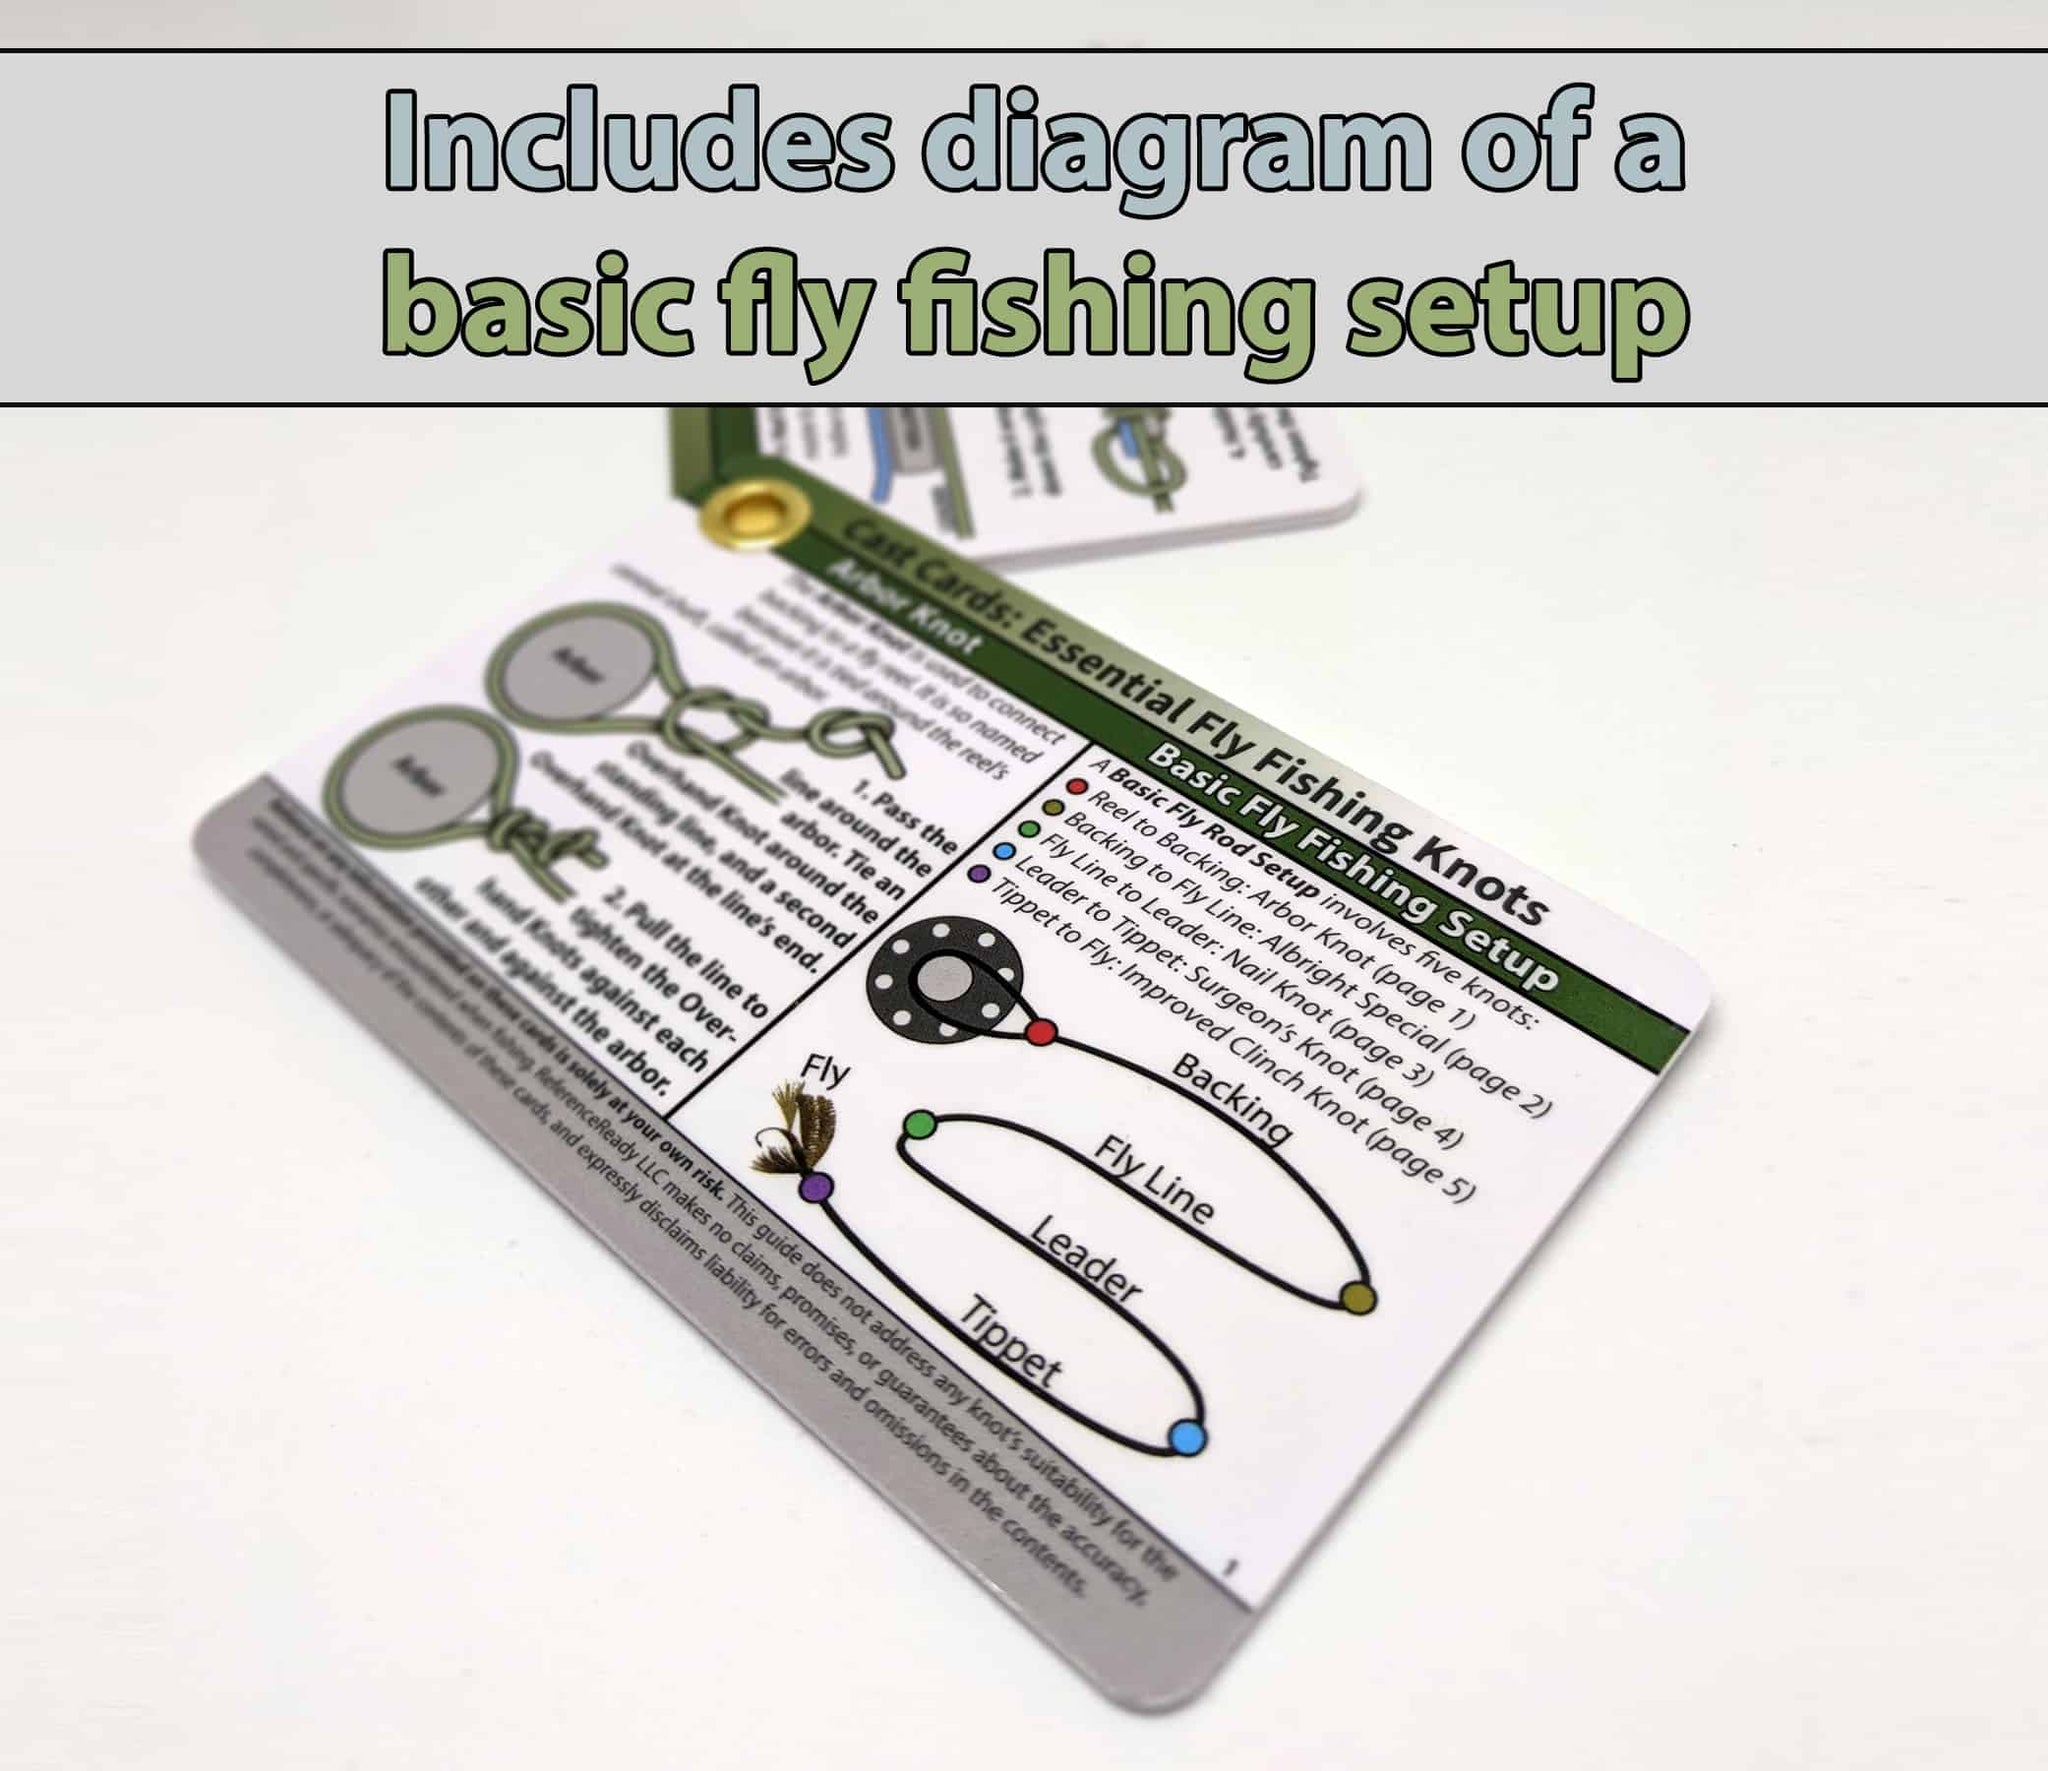 ReferenceReady Fly Fishing Knot Tying Kit - Includes Kuwait